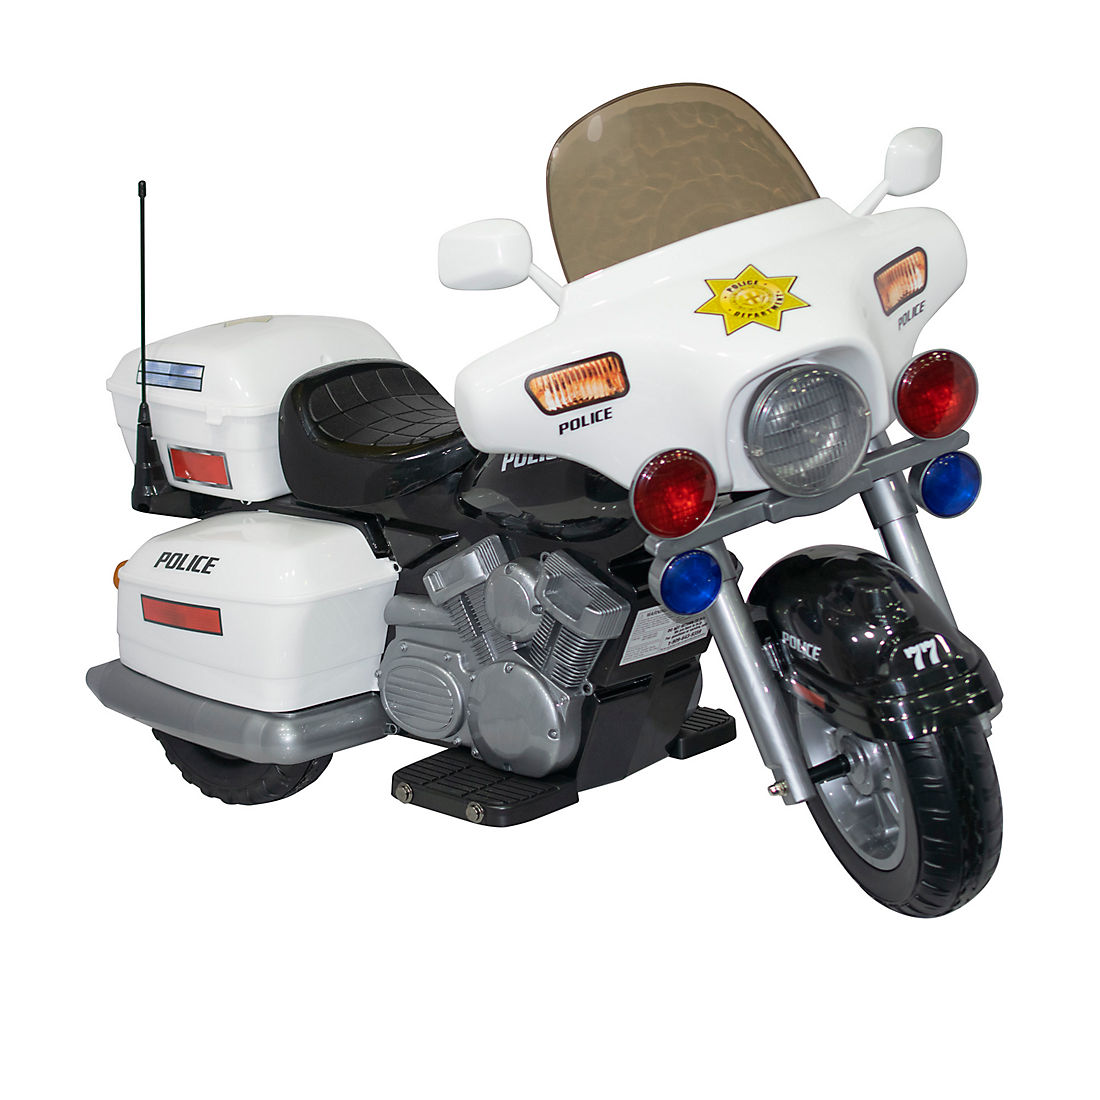 Kidz Motorz 12v Battery Powered Police Motorcycle White for sale online 